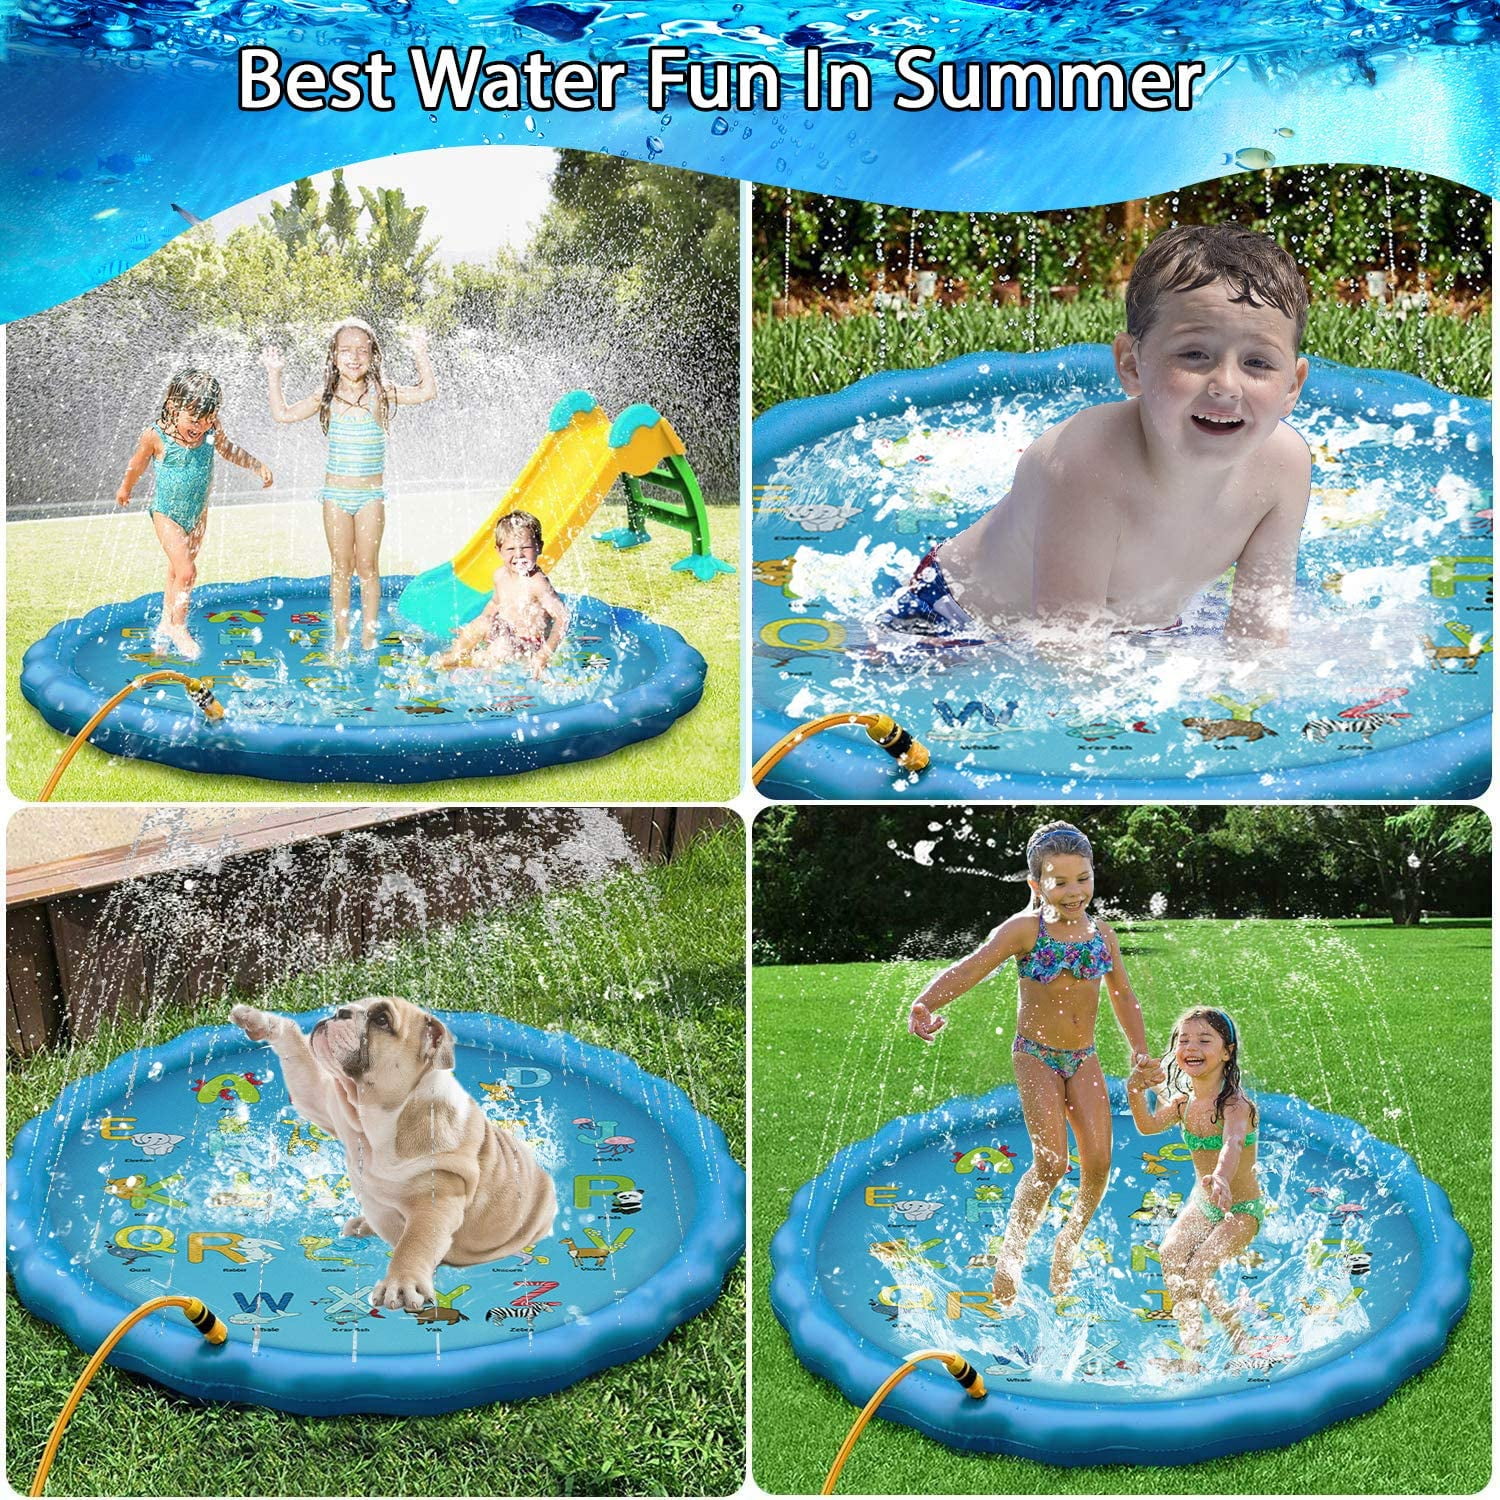 Kiddie Inflatable Bath for Infant and Toddler Boys and Girls Blue Wading and Playing Tub with Yellow Shade Perfect Toy for Outdoor Summer Fun Bundaloo Duck Baby Pool with Canopy and Sprinkler